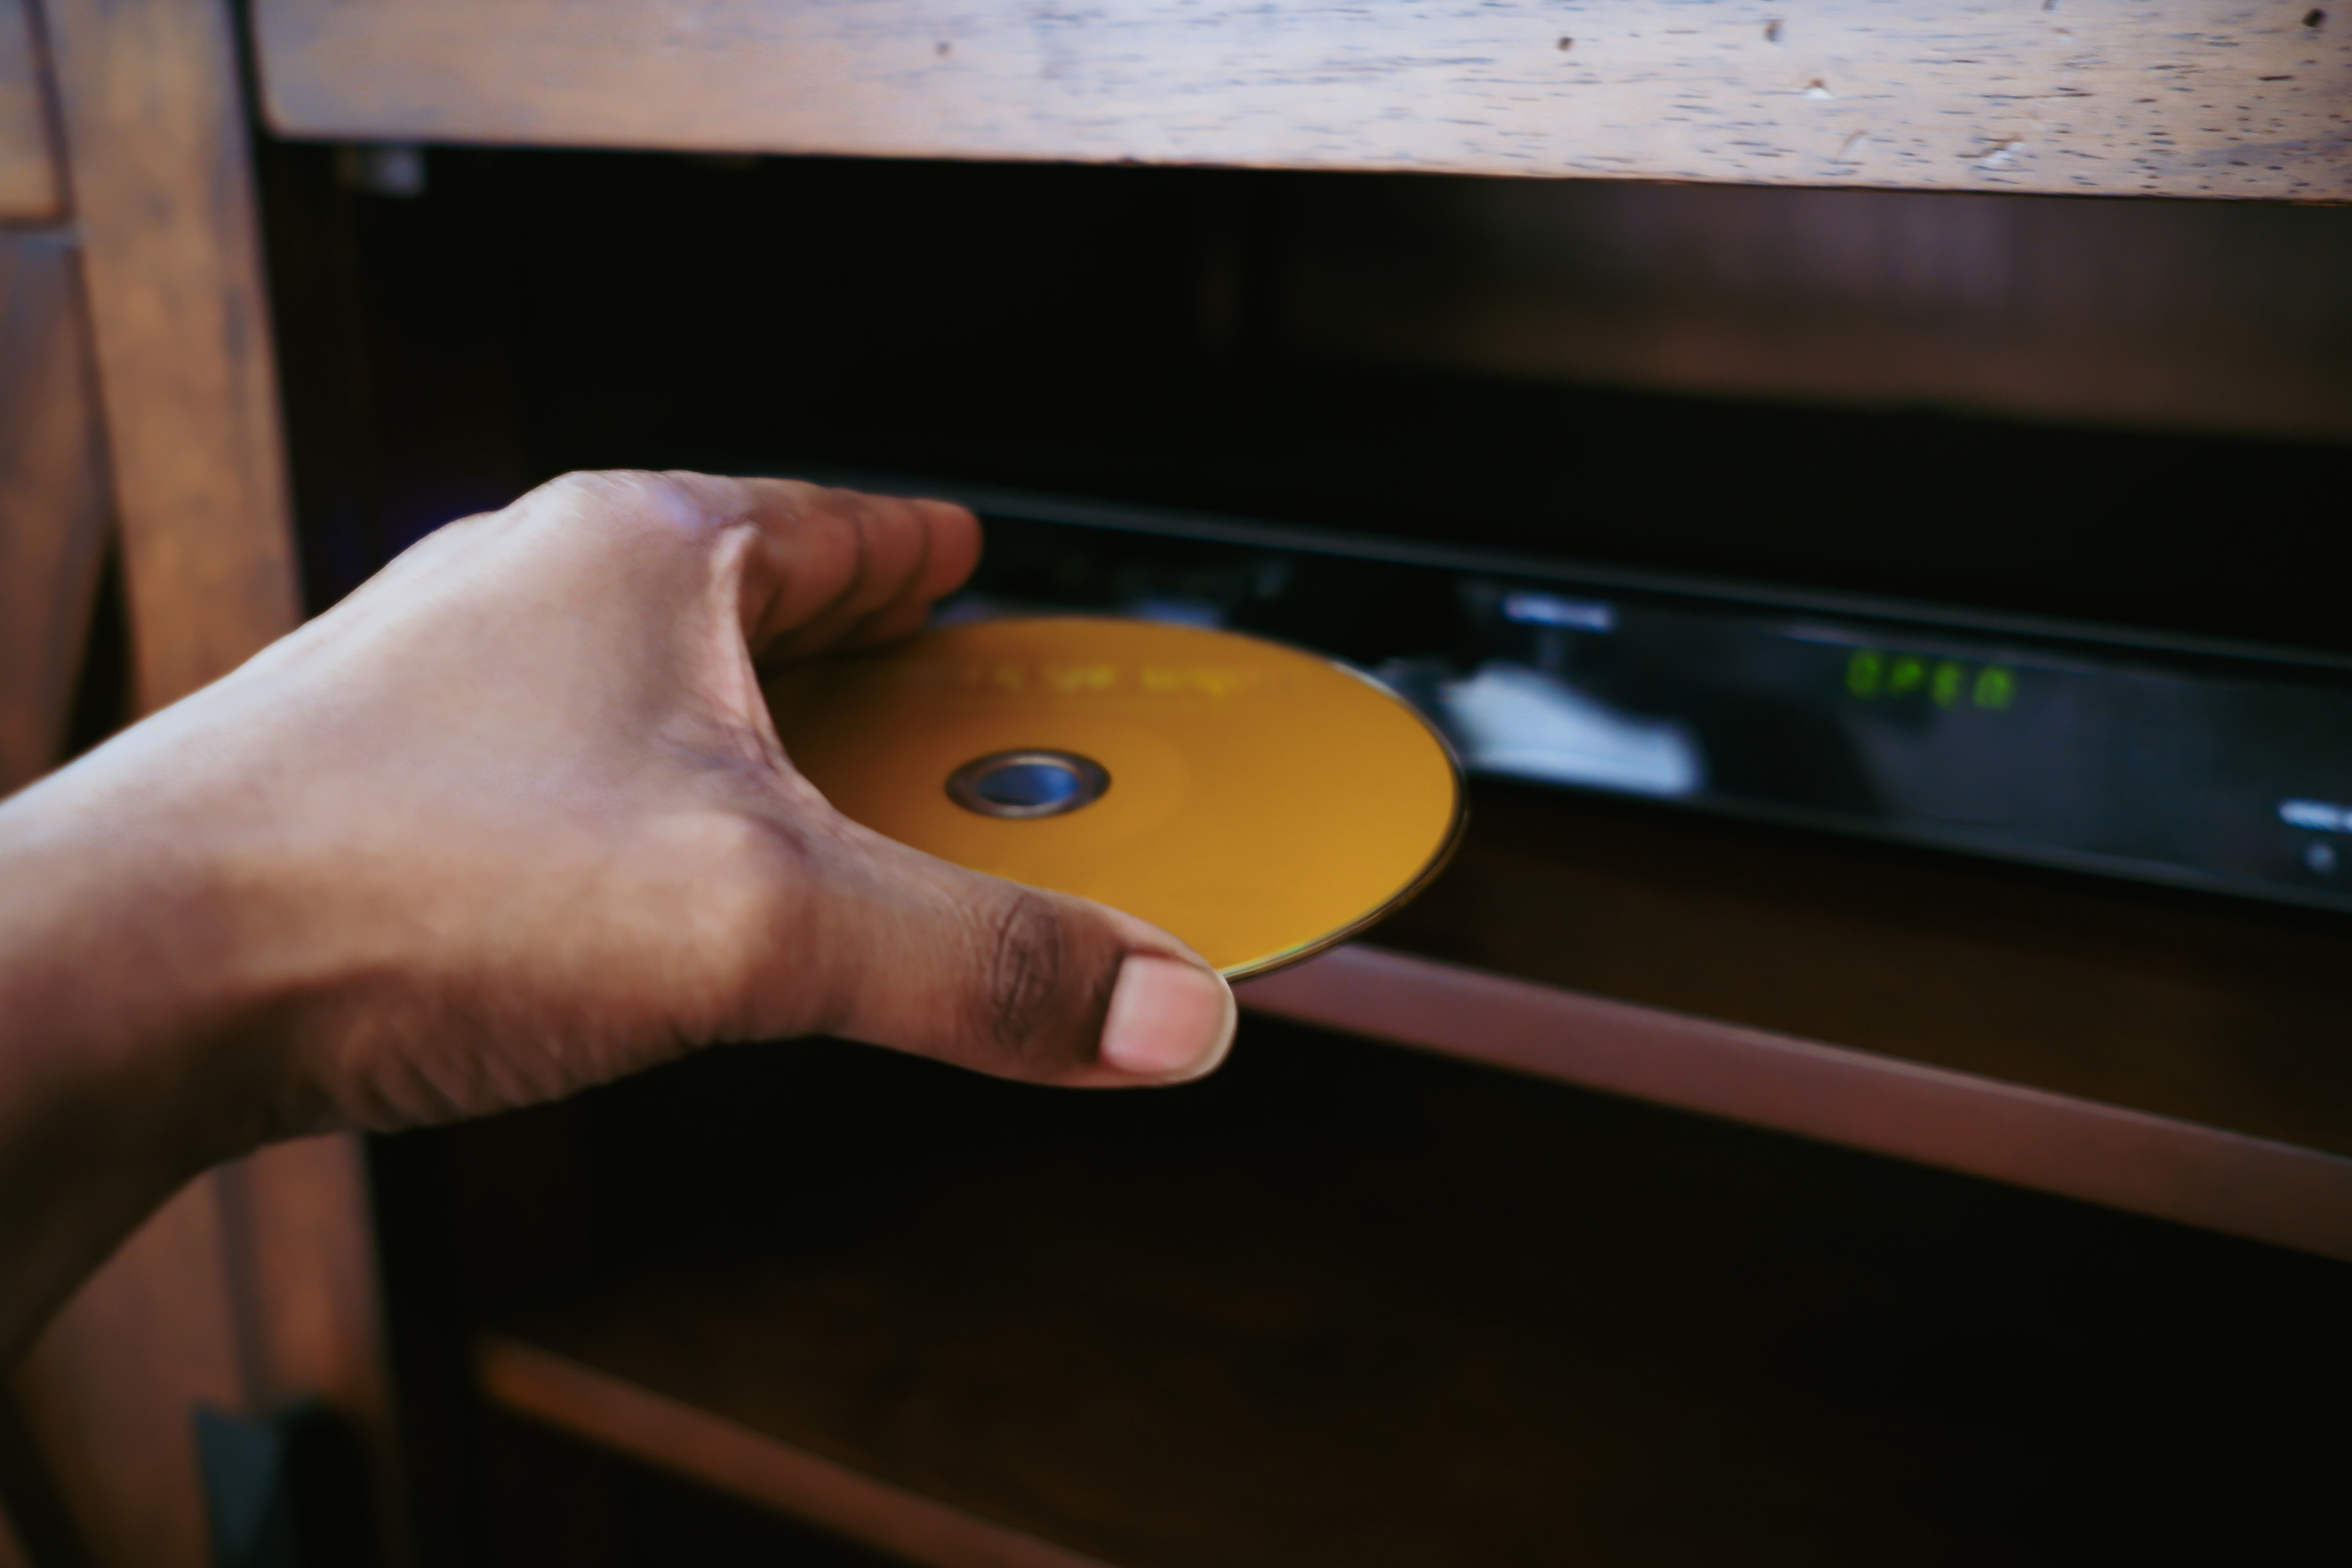 A person putting a DVD into a DVD player